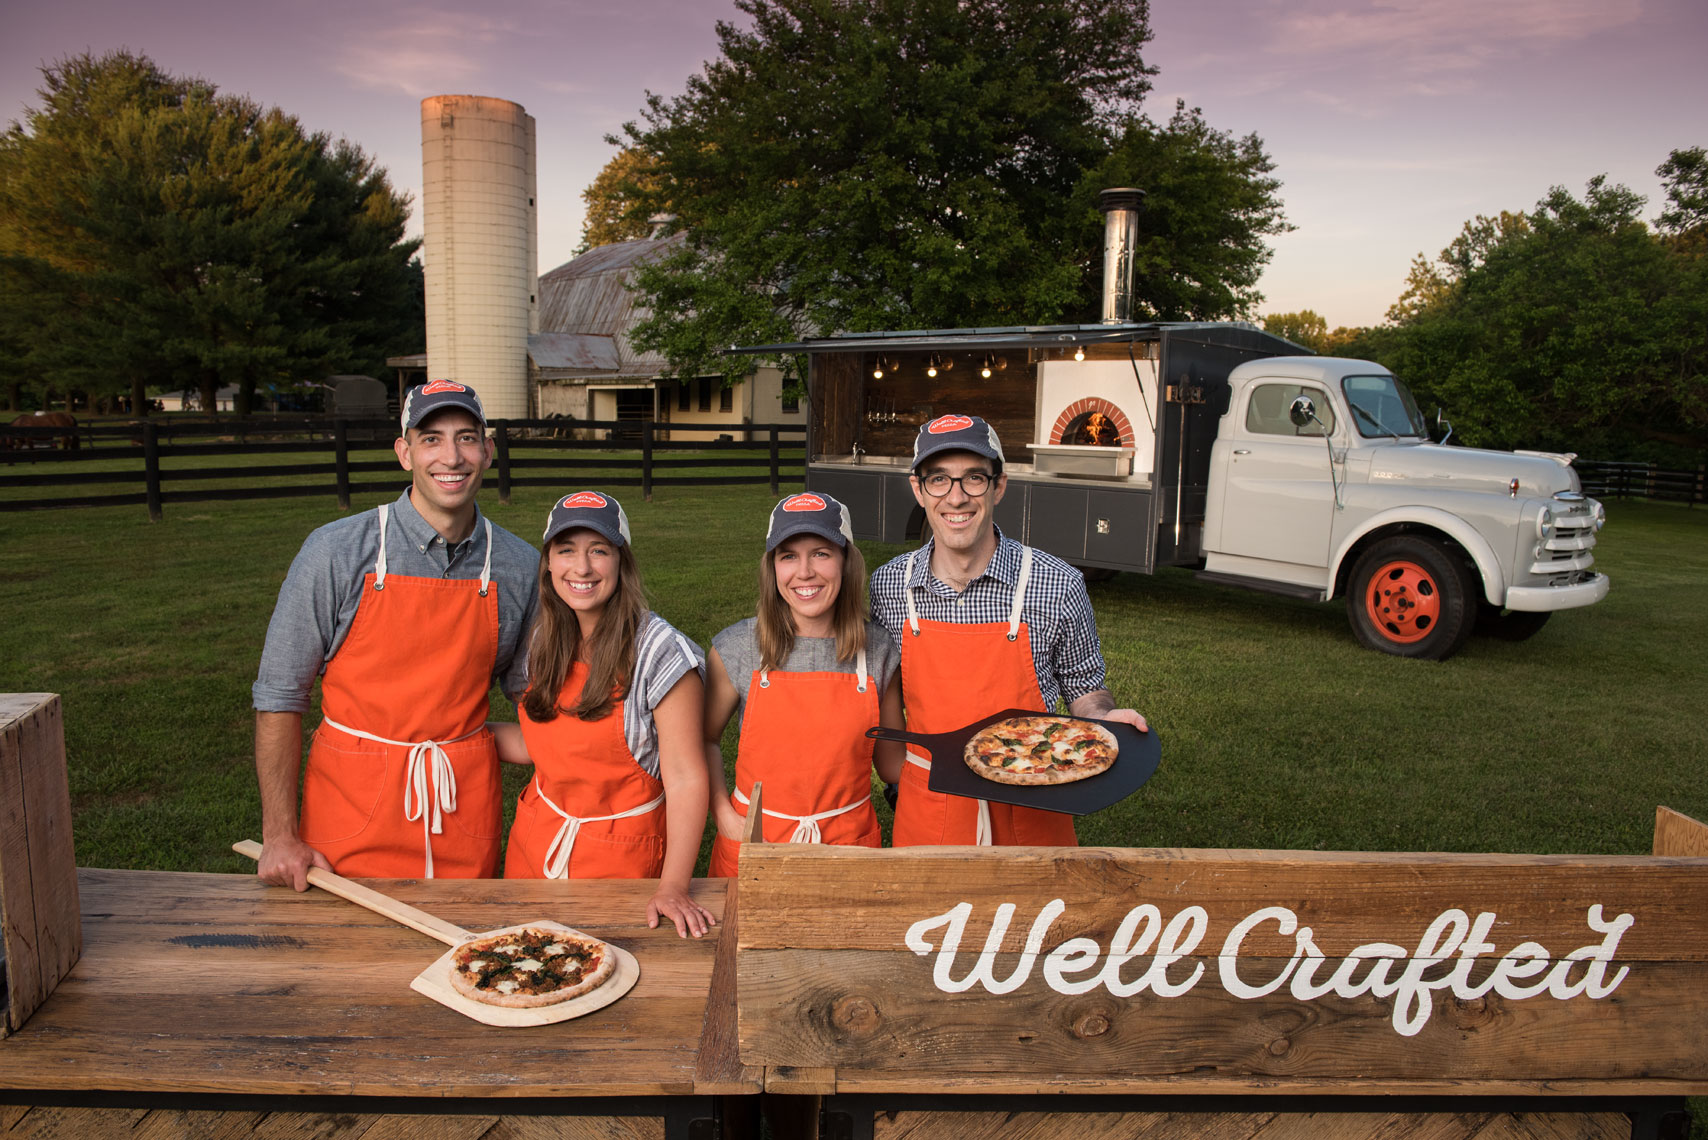 Four smiling pizza makers standing in front of their pizza truck on a farm